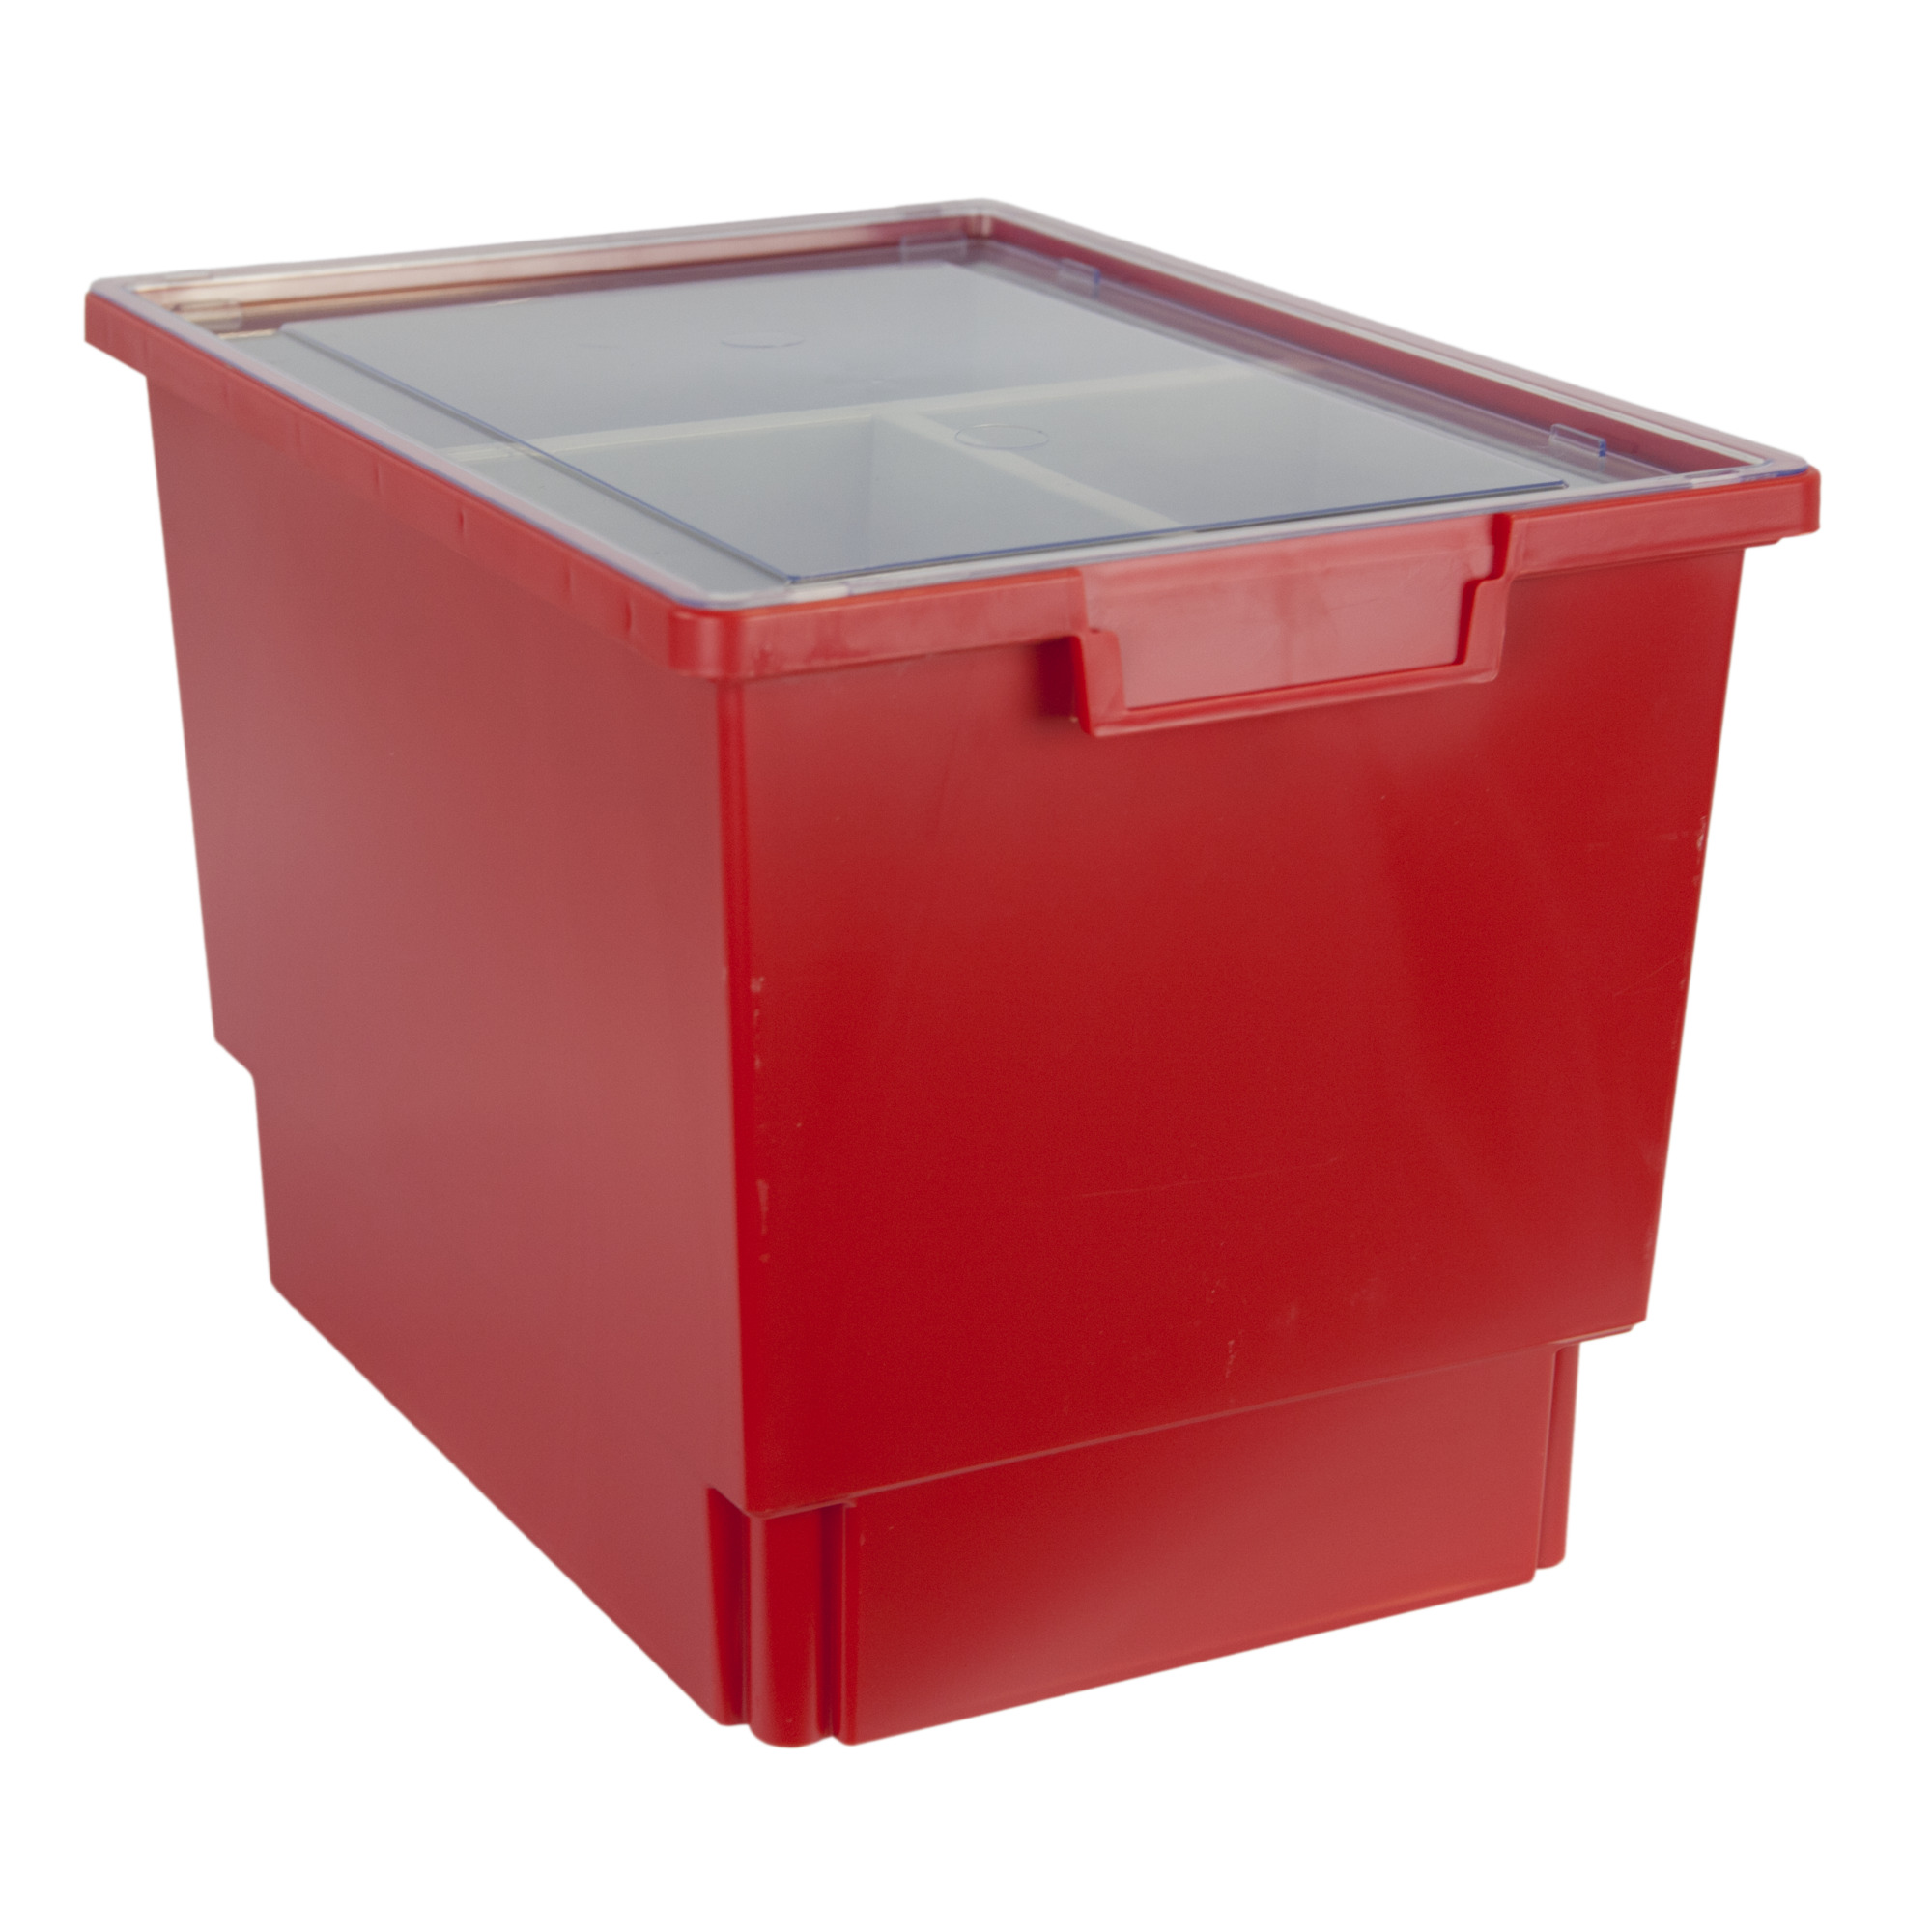 Certwood StorWerks, Slim Line 12Inch Tray Kit (3 x Inserts) Red-3PK, Included (qty.) 3, Material Plastic, Height 12 in, Model CE1954PR-NK0004-3